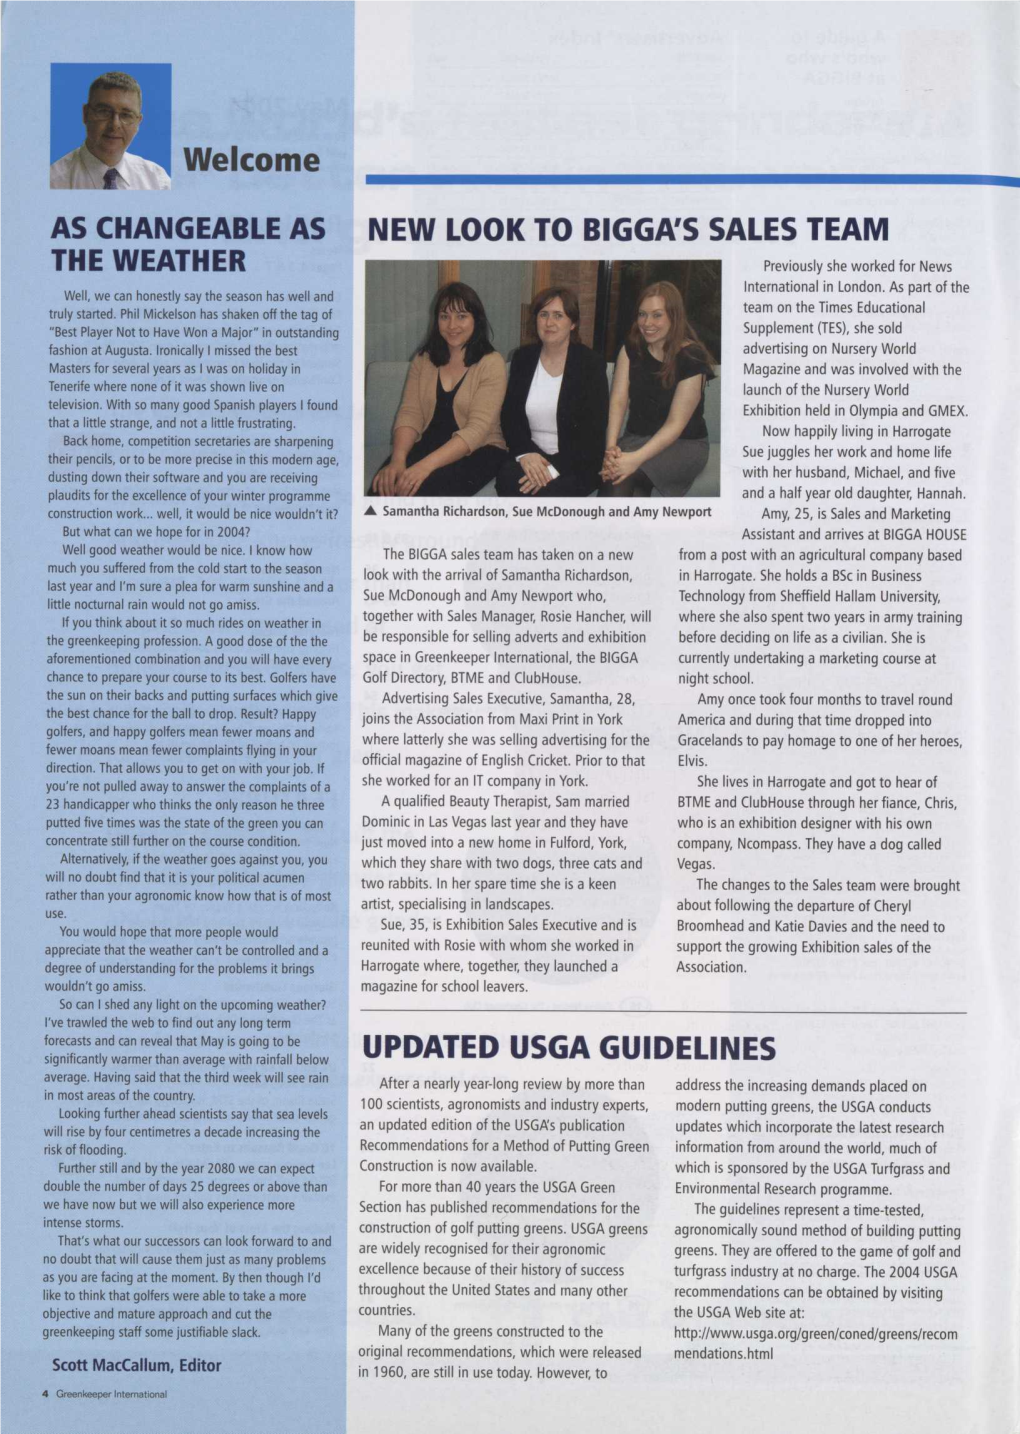 I Welcome NEW LOOK to BIGGA's SALES TEAM UPDATED USGA GUIDELINES AS CHANGEABLE AS the WEATHER